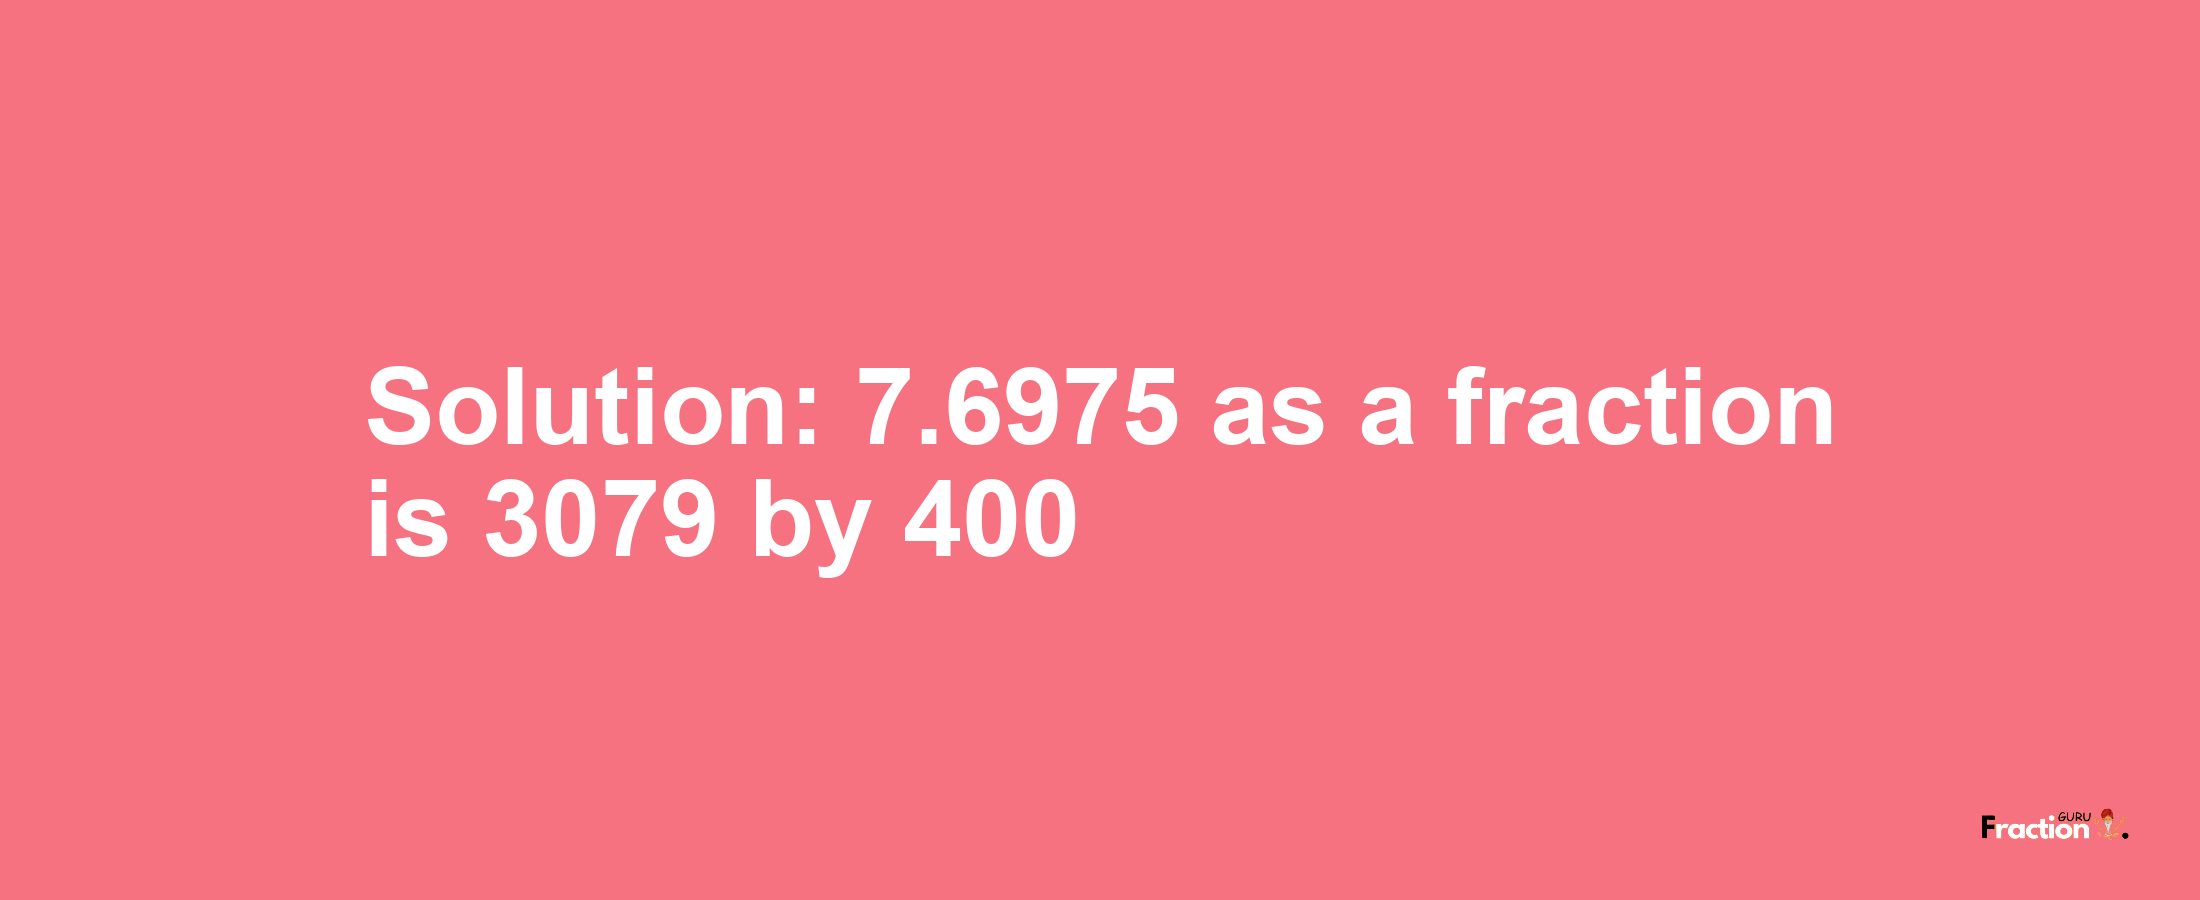 Solution:7.6975 as a fraction is 3079/400